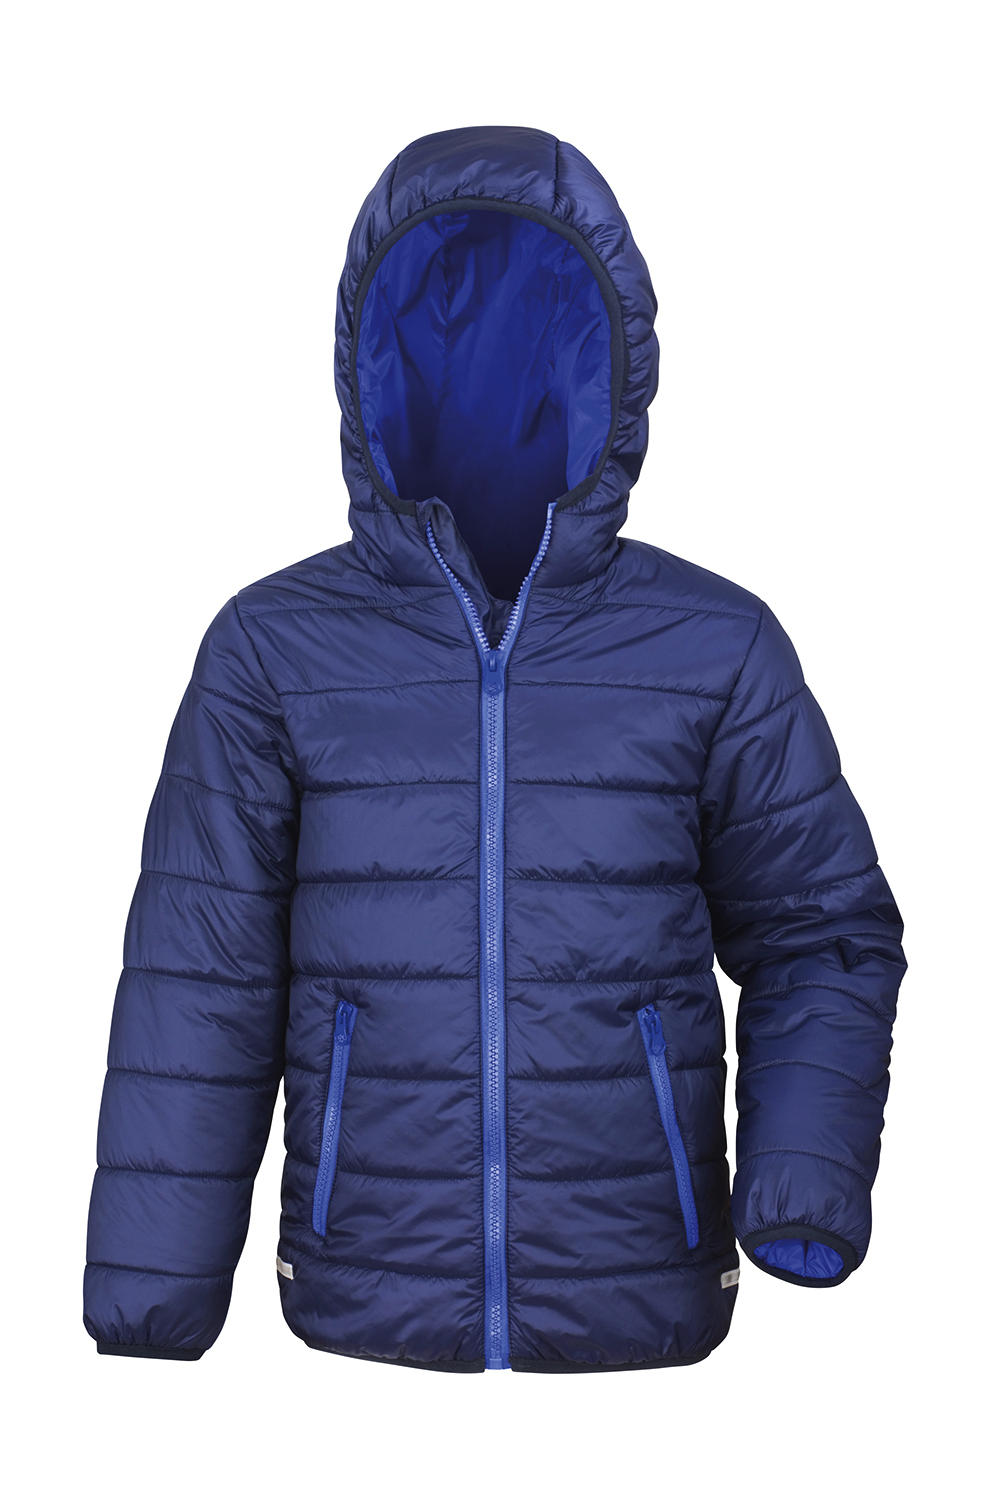  Junior/Youth Soft Padded Jacket in Farbe Navy/Royal